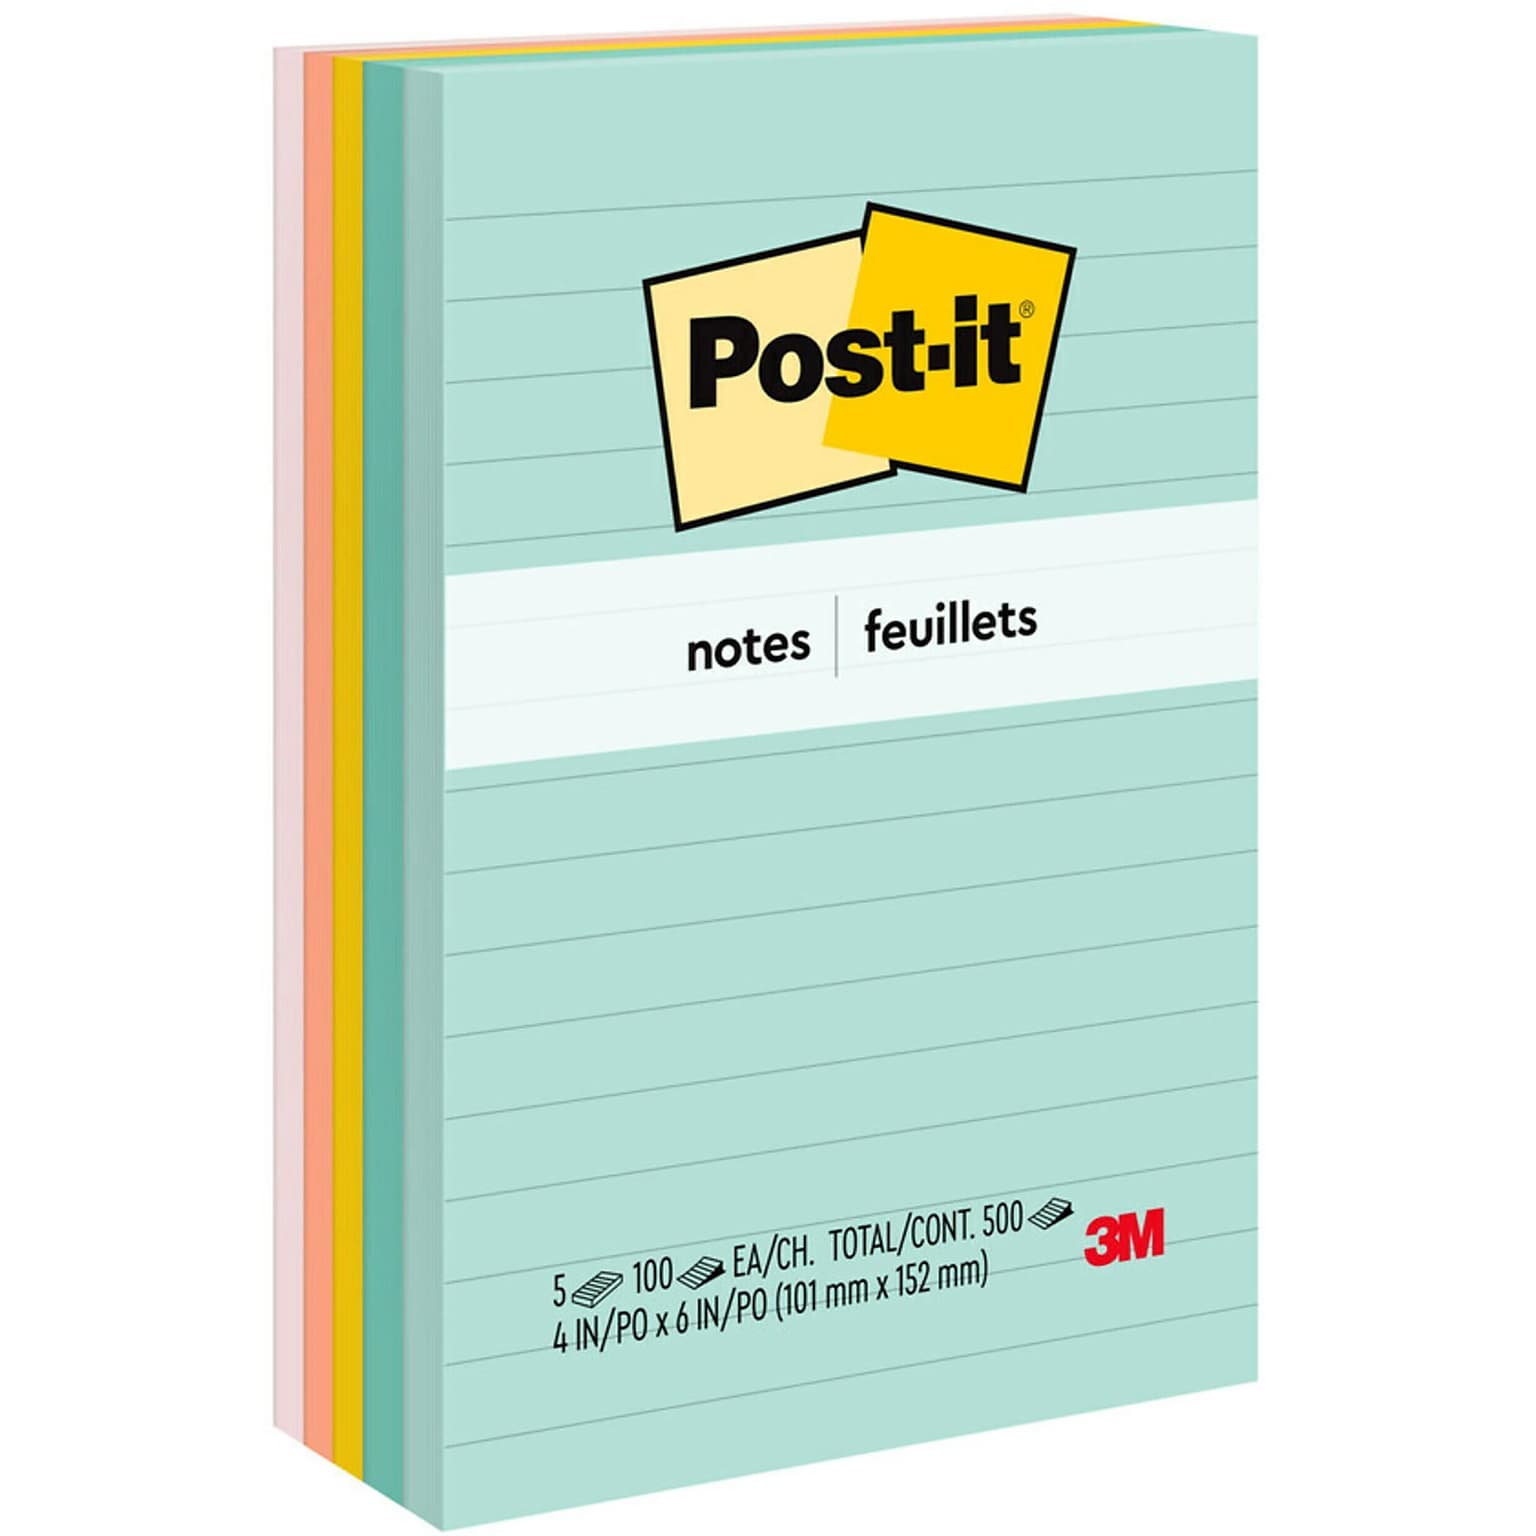 Post-it Sticky Notes, 4 x 6 in., 5 Pads, 100 Sheets/Pad, Lined, The Original Post-it Note, Beachside Café Collection